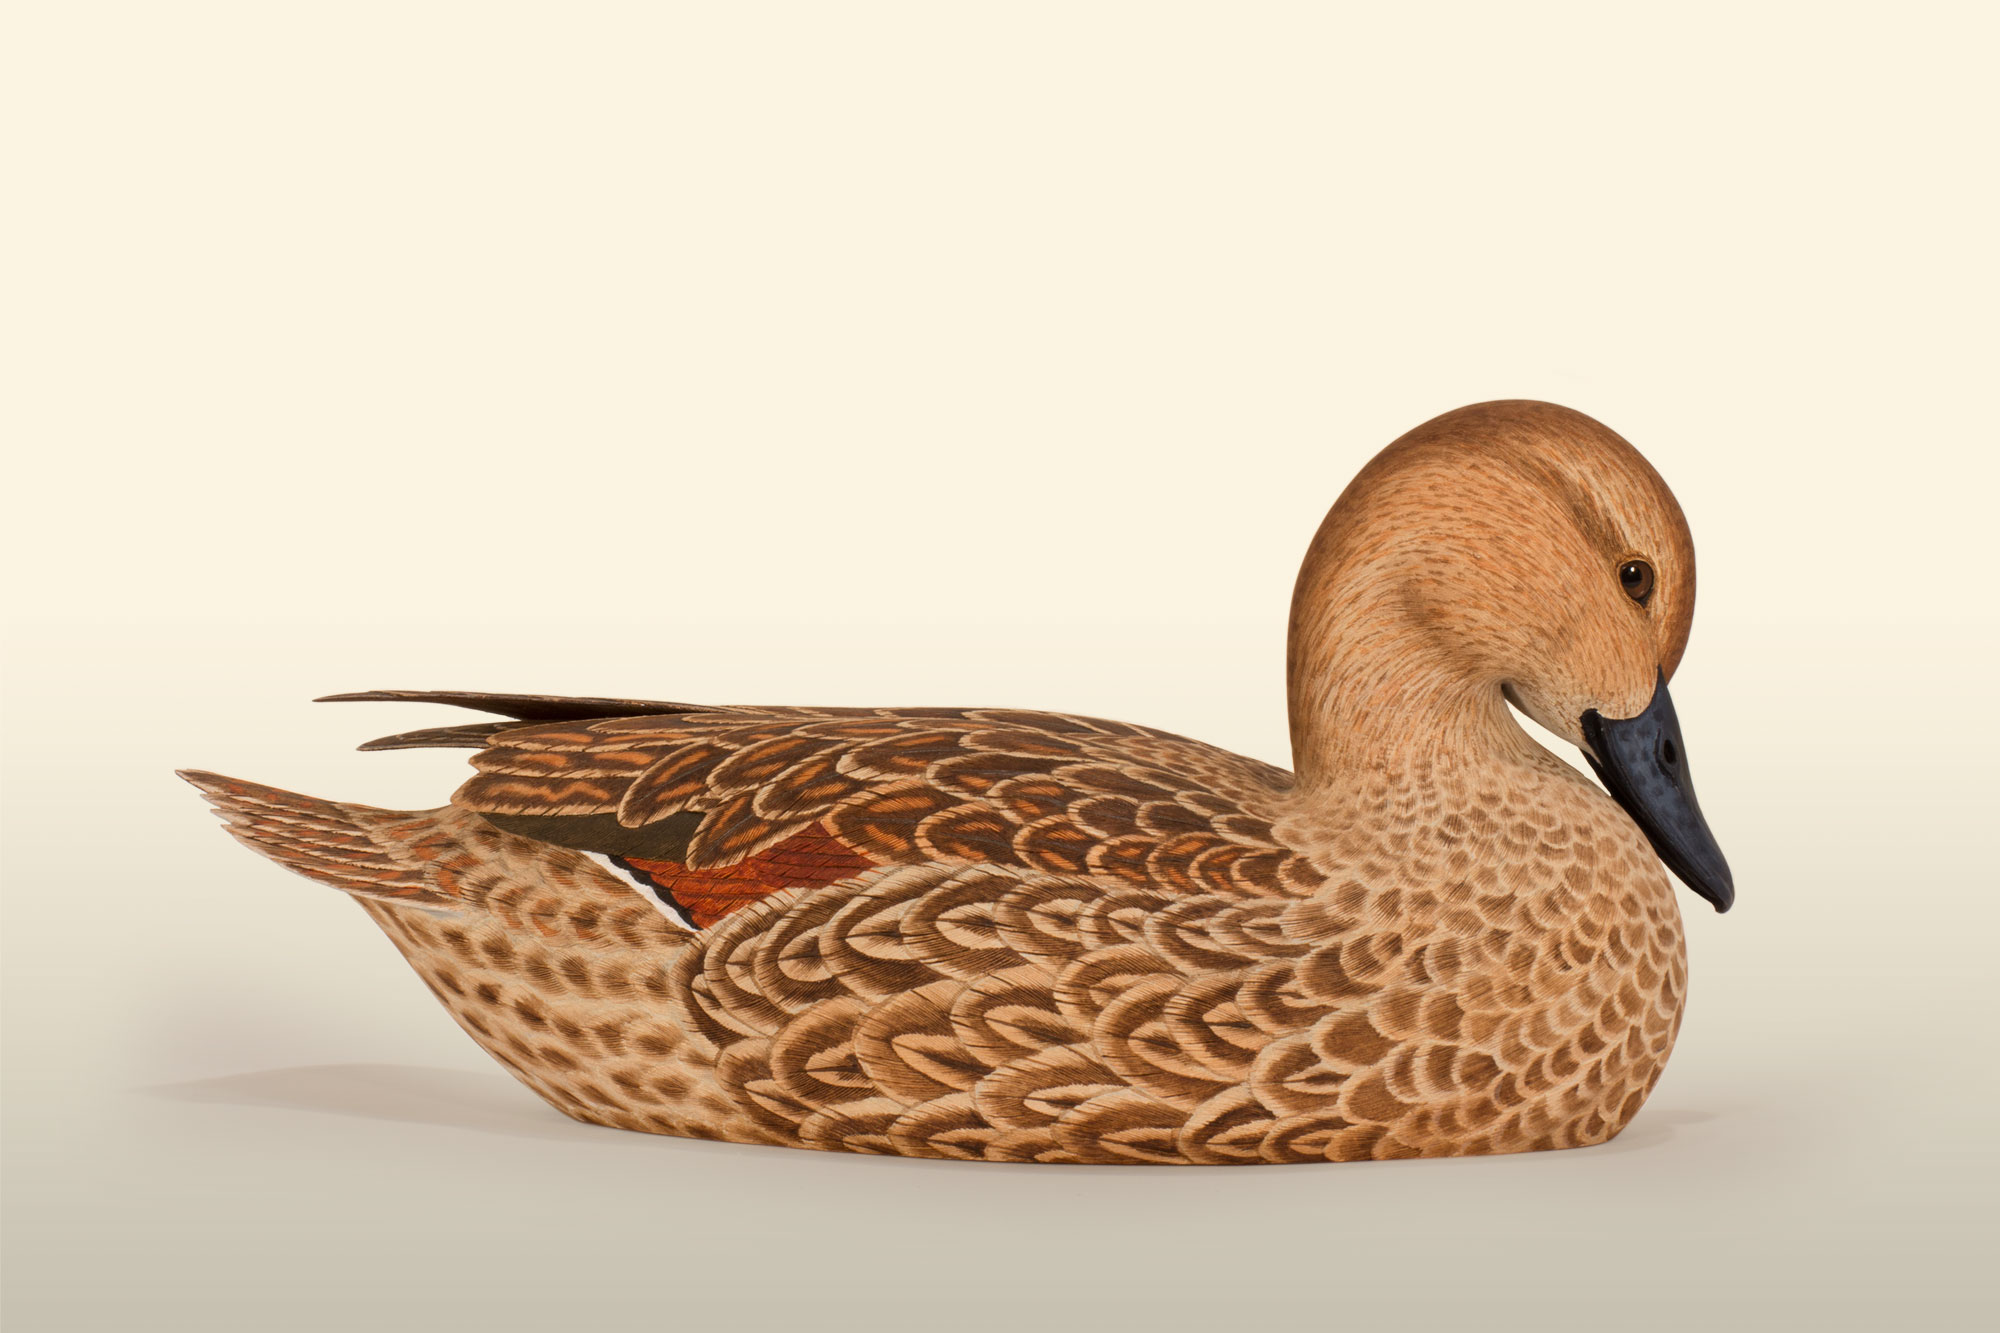 Pintail Hen 75% right view bird wood carving by Feathercarver David Patrick-Brown